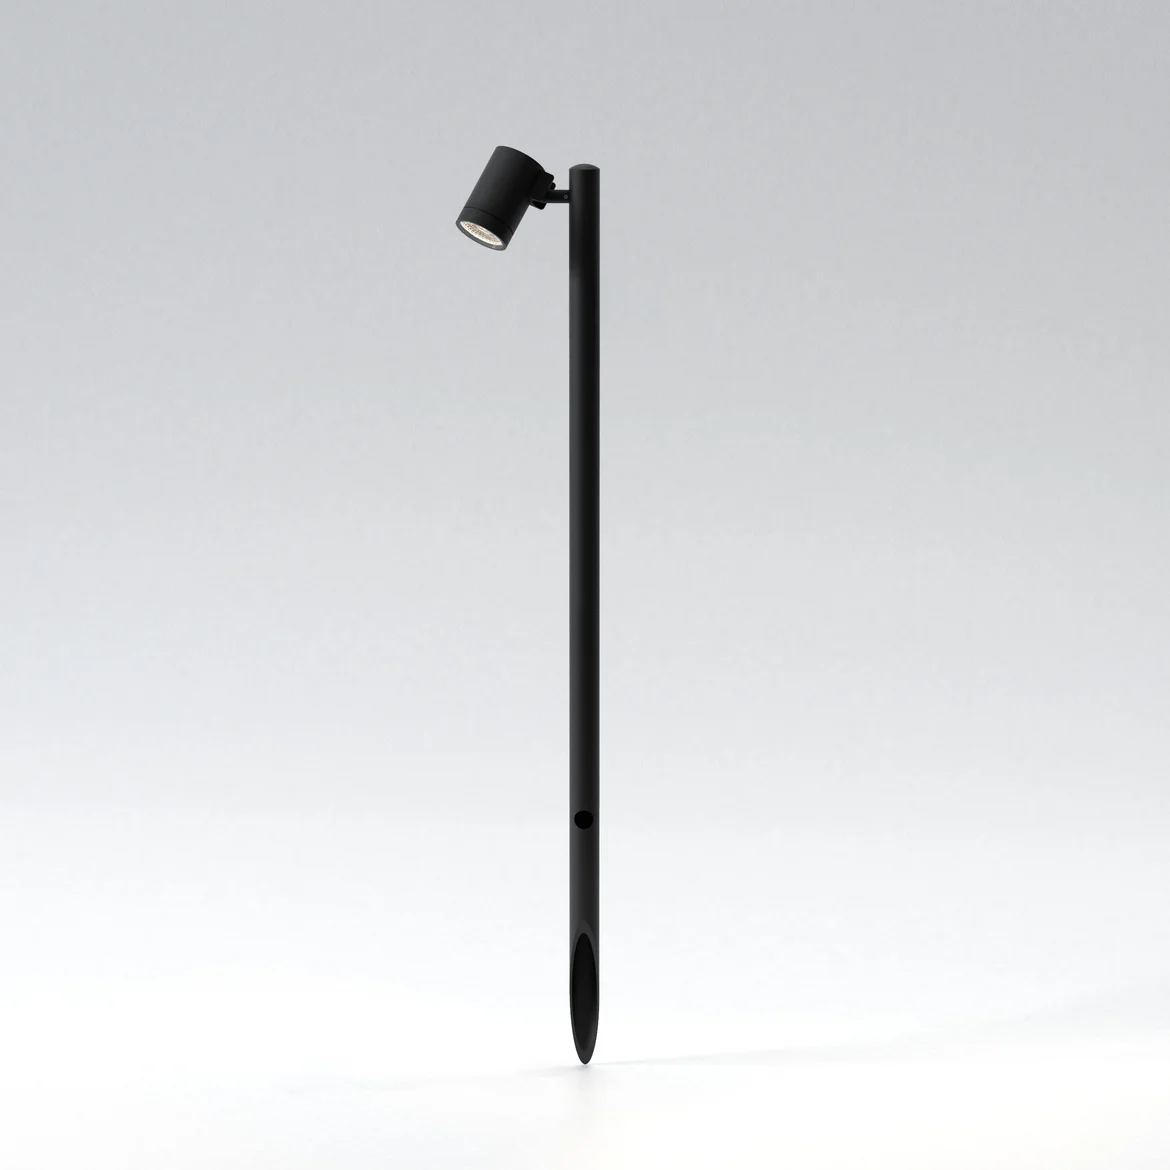 The Bayville Spike 900 spot light features a sleek, modern design with cylindrical body ending in a spike for outdoor in-ground installation with a mounted spotlight. Made from steel and available in a textured black finish. IP66 rated and suitable for outdoor use. Comes complete with an integrated 8.1W LED in 3000K.